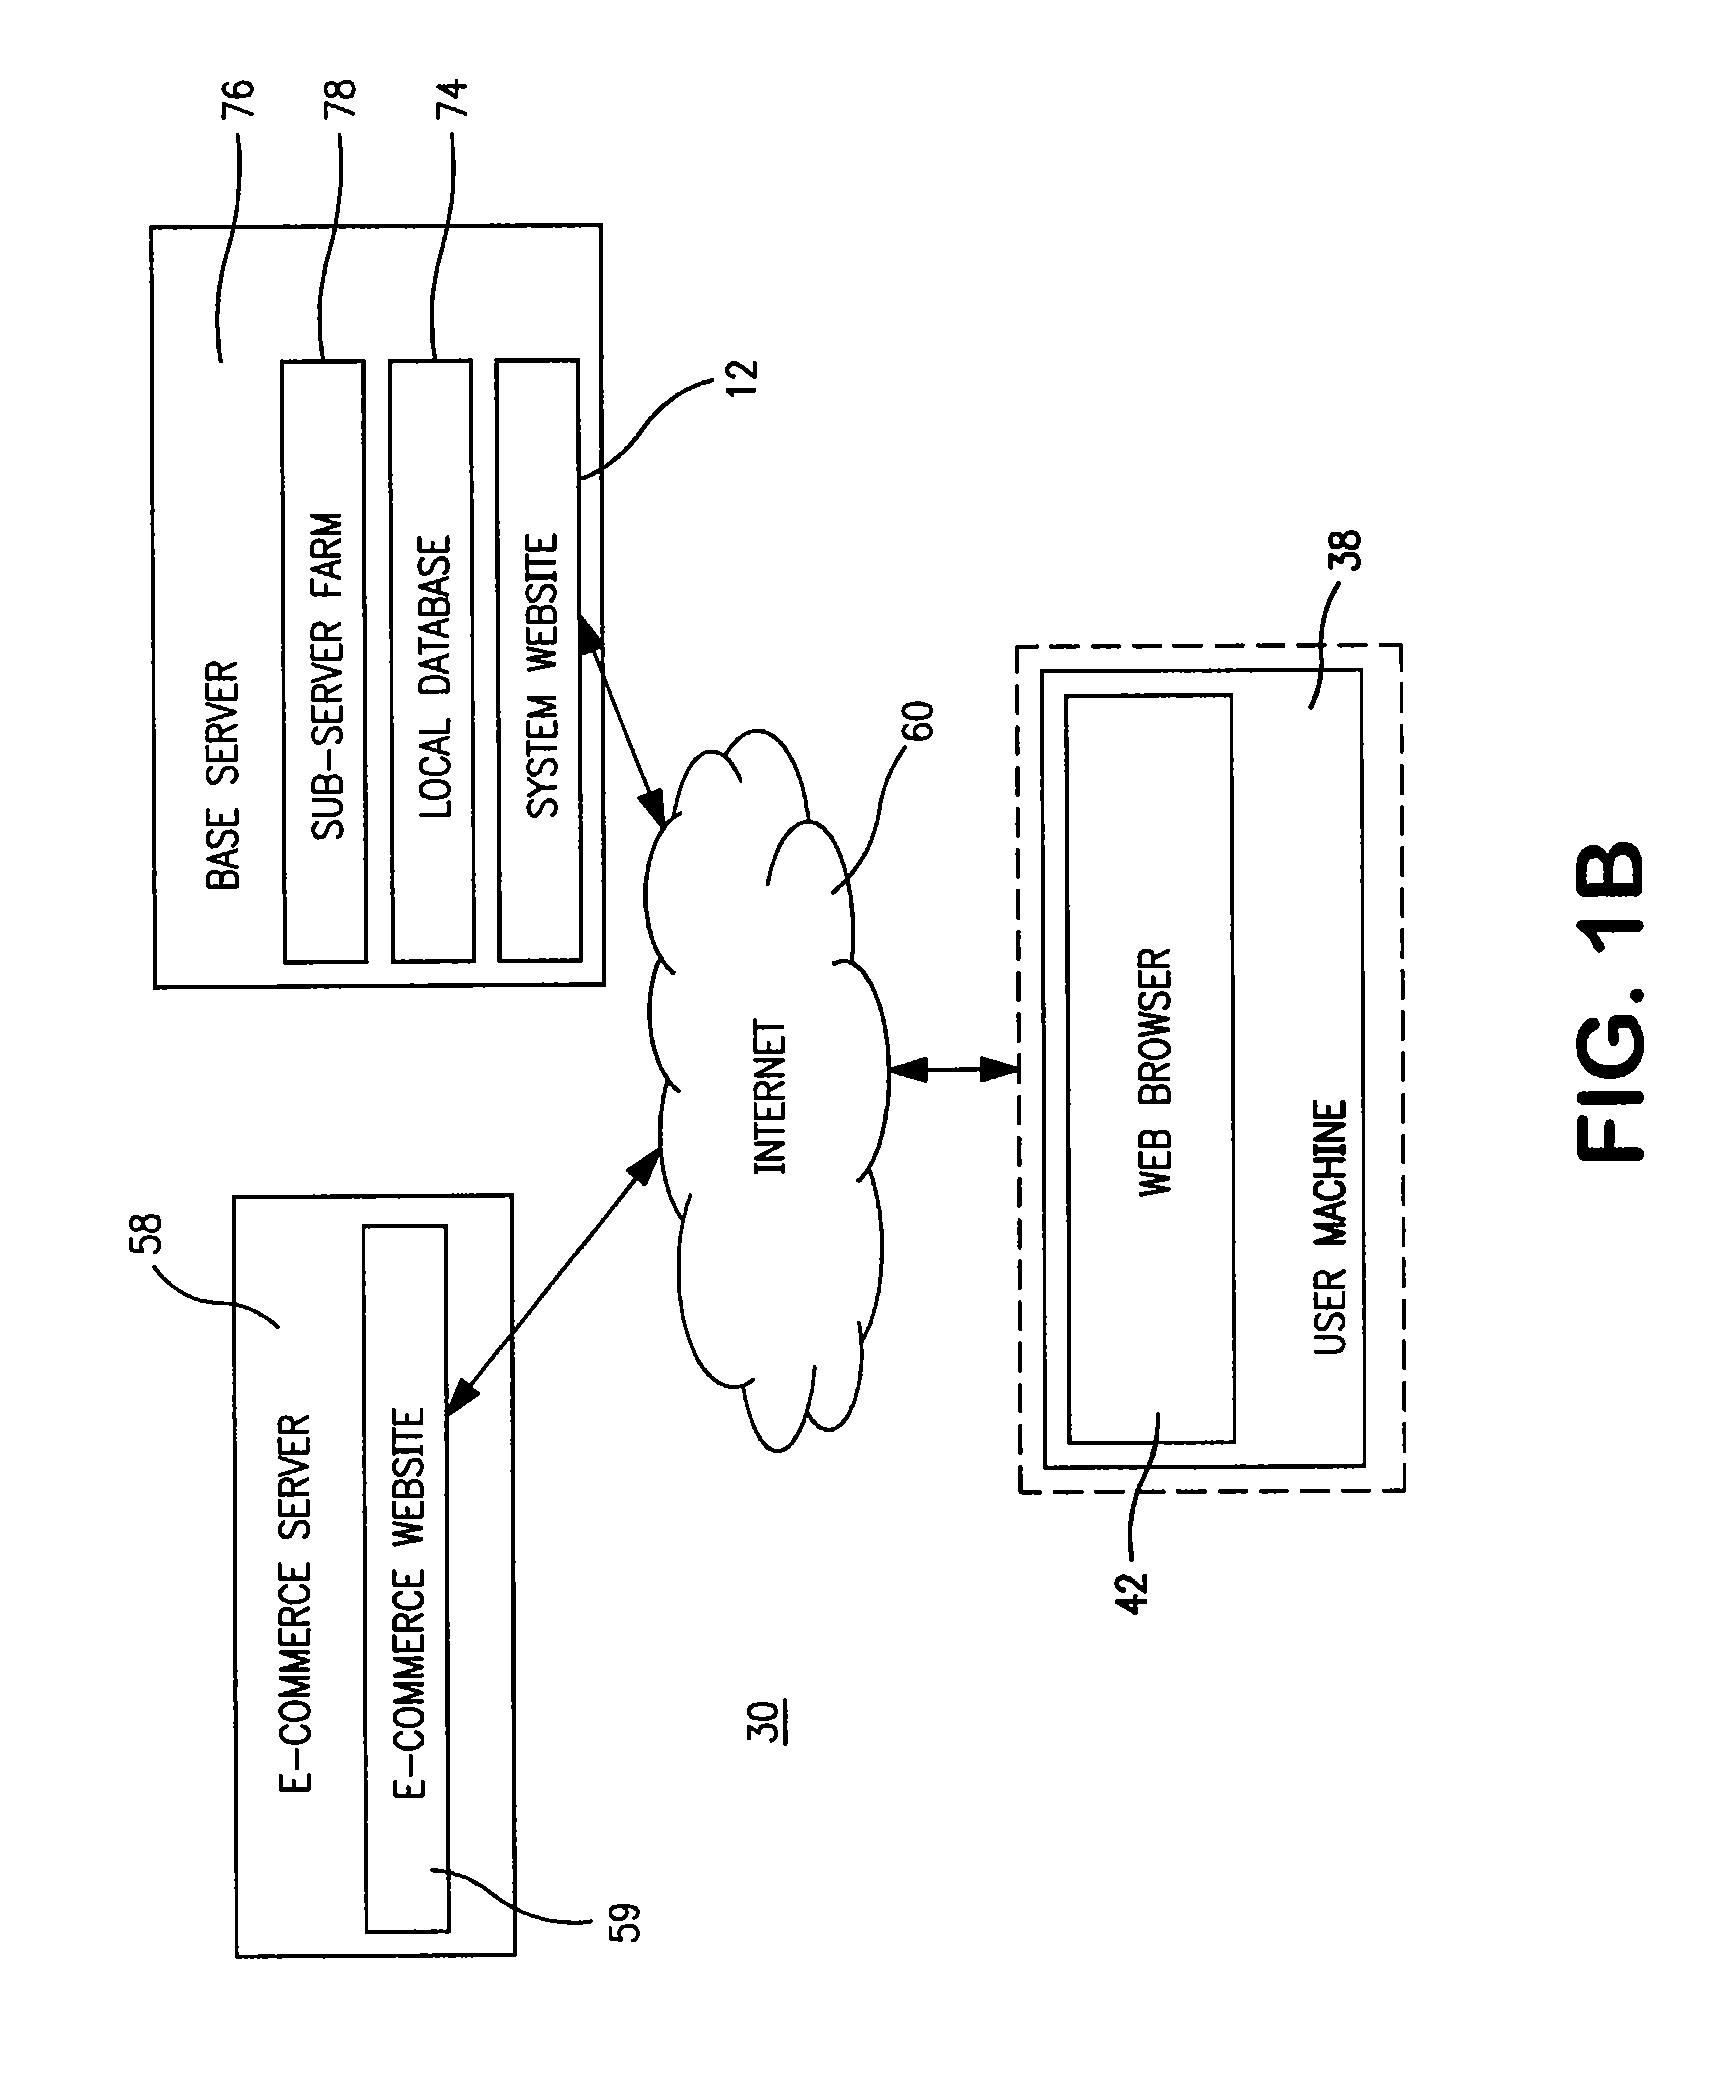 System, method and apparatus for interactive and comparative shopping